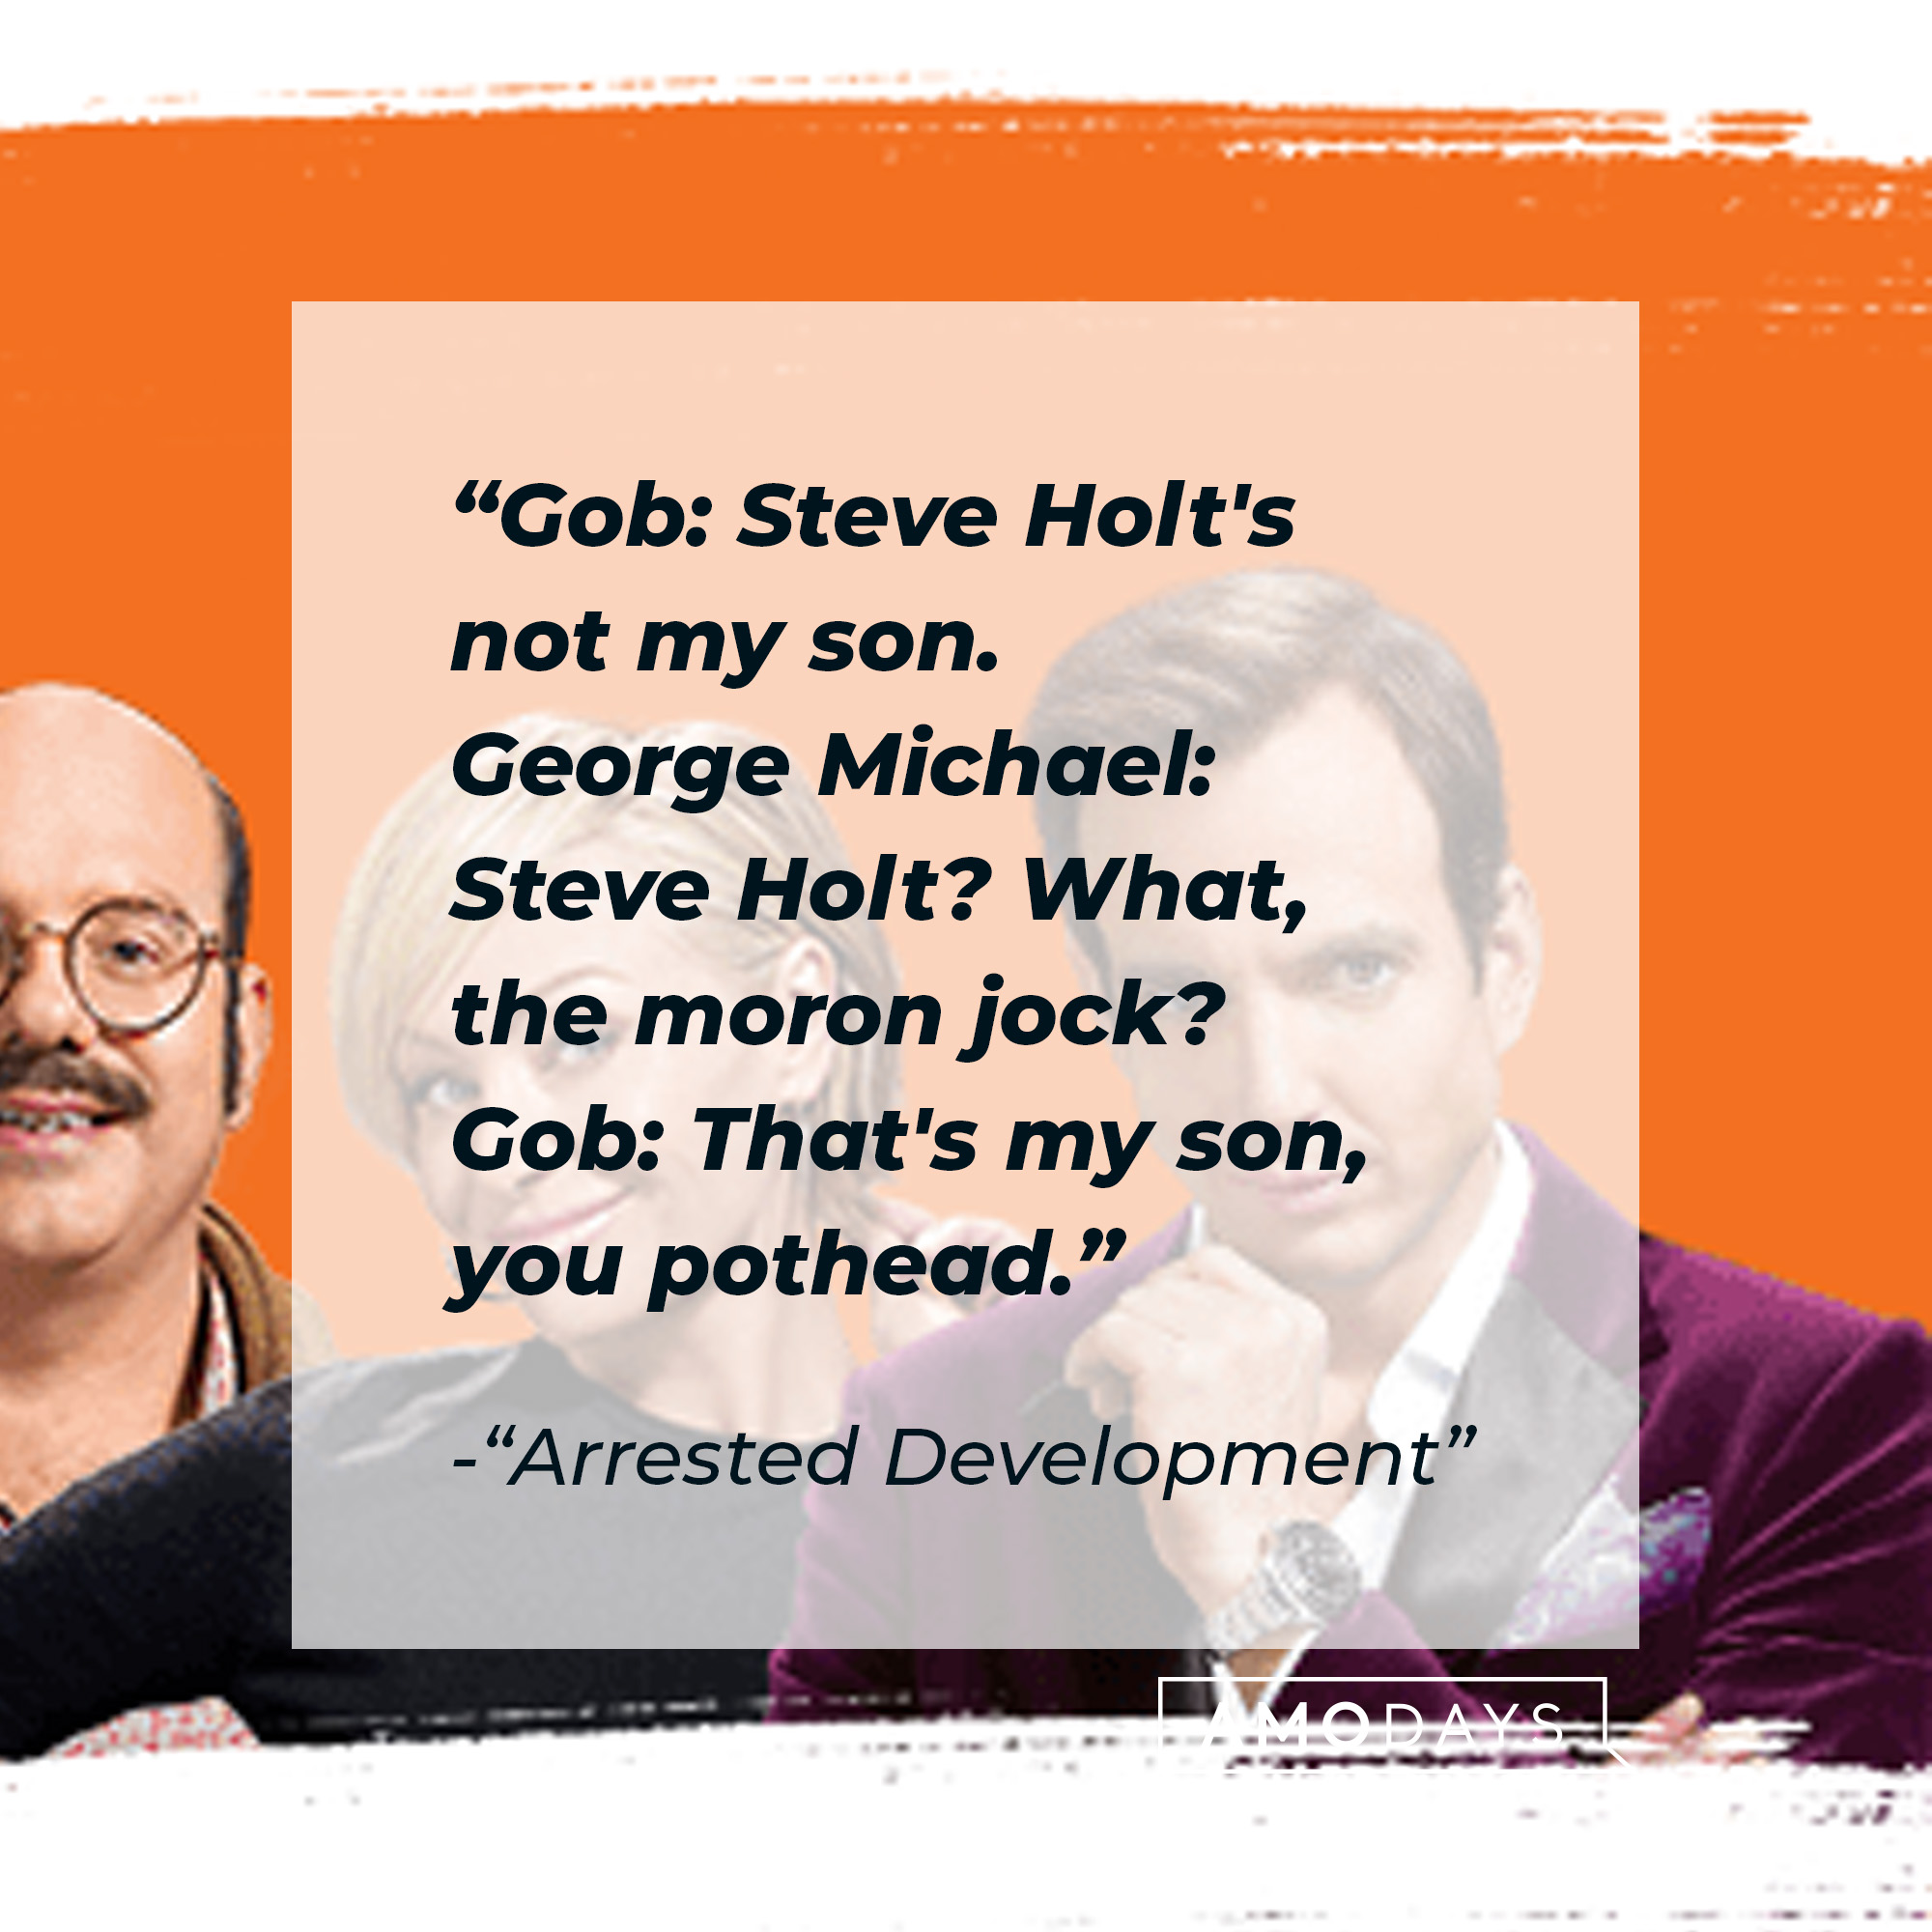 Quote from "Arrested Development:" "Gob: Steve Holt's not my son. George Michael: Steve Holt? What, the moron jock? Gob: That's my son, you pothead." | Source: facebook.com/ArrestedDevelopment